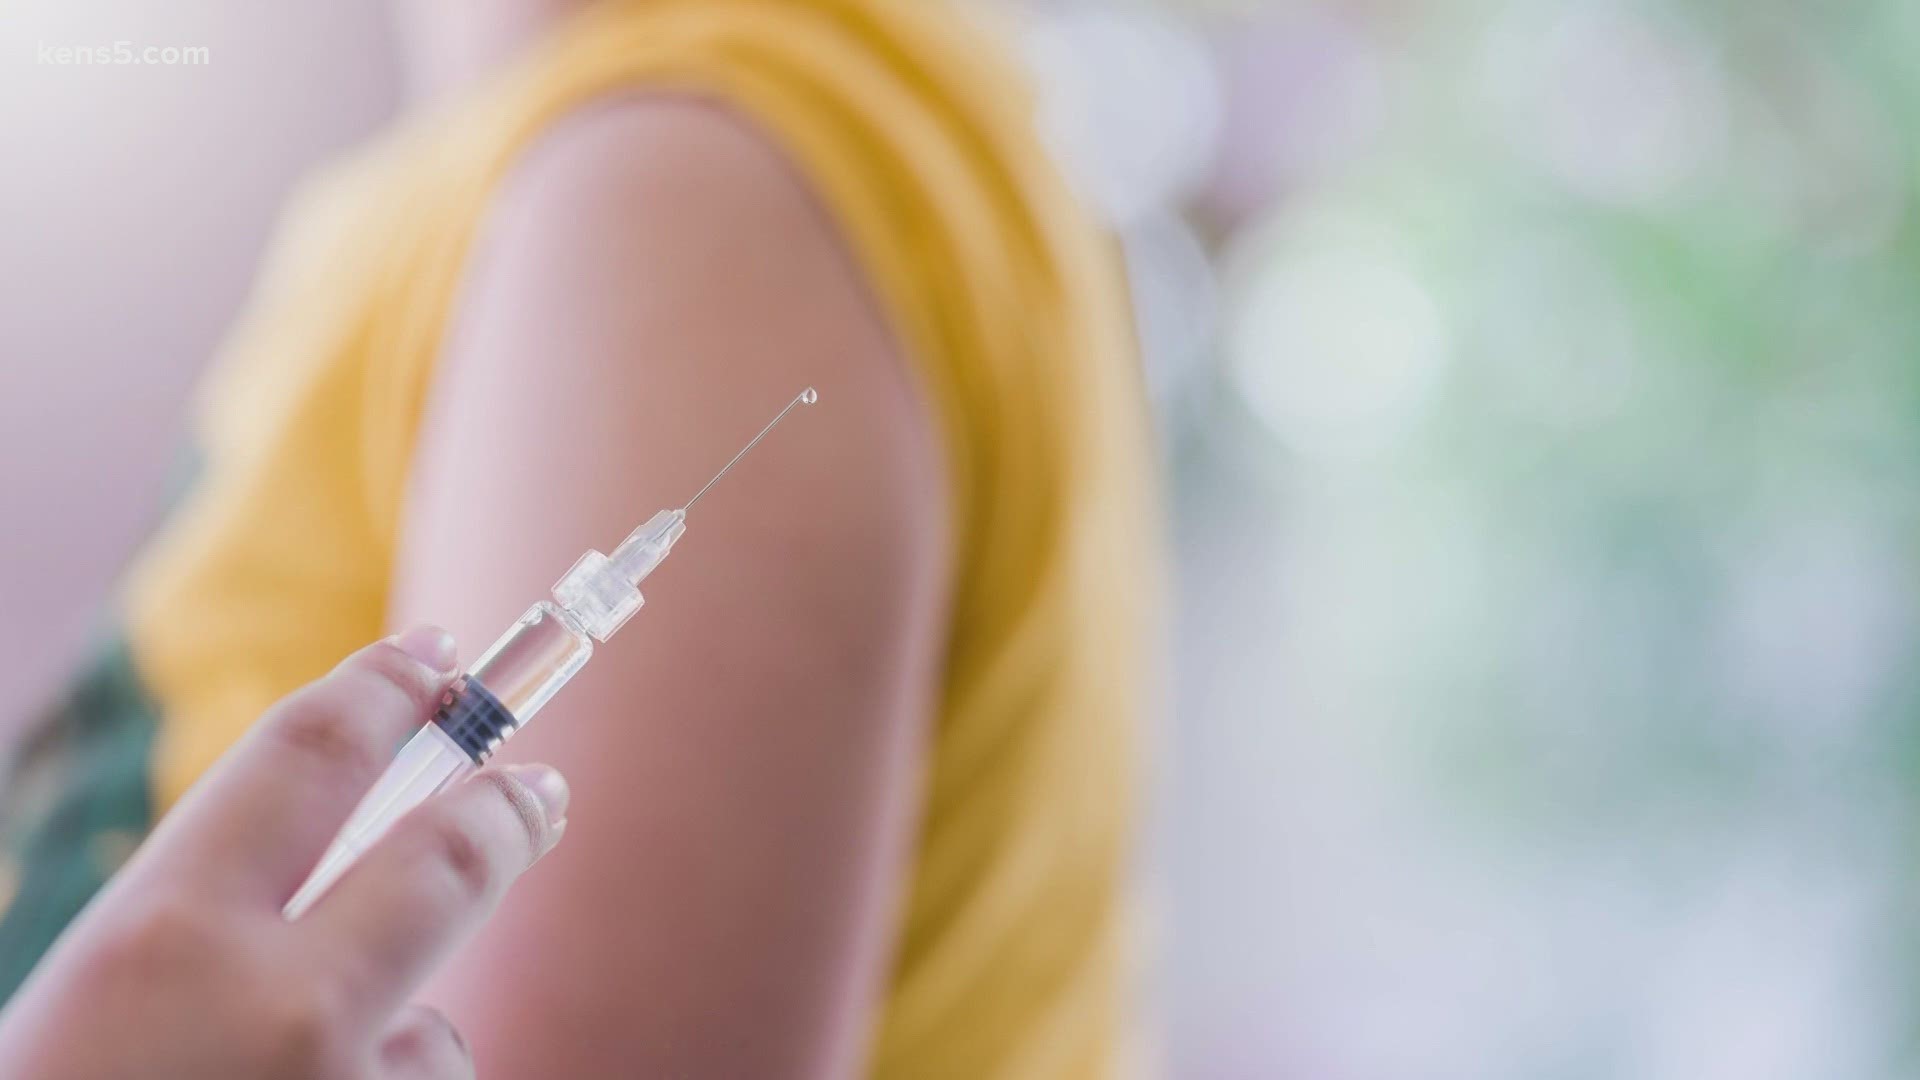 How does the vaccine get the Federal Government's standard for approval?